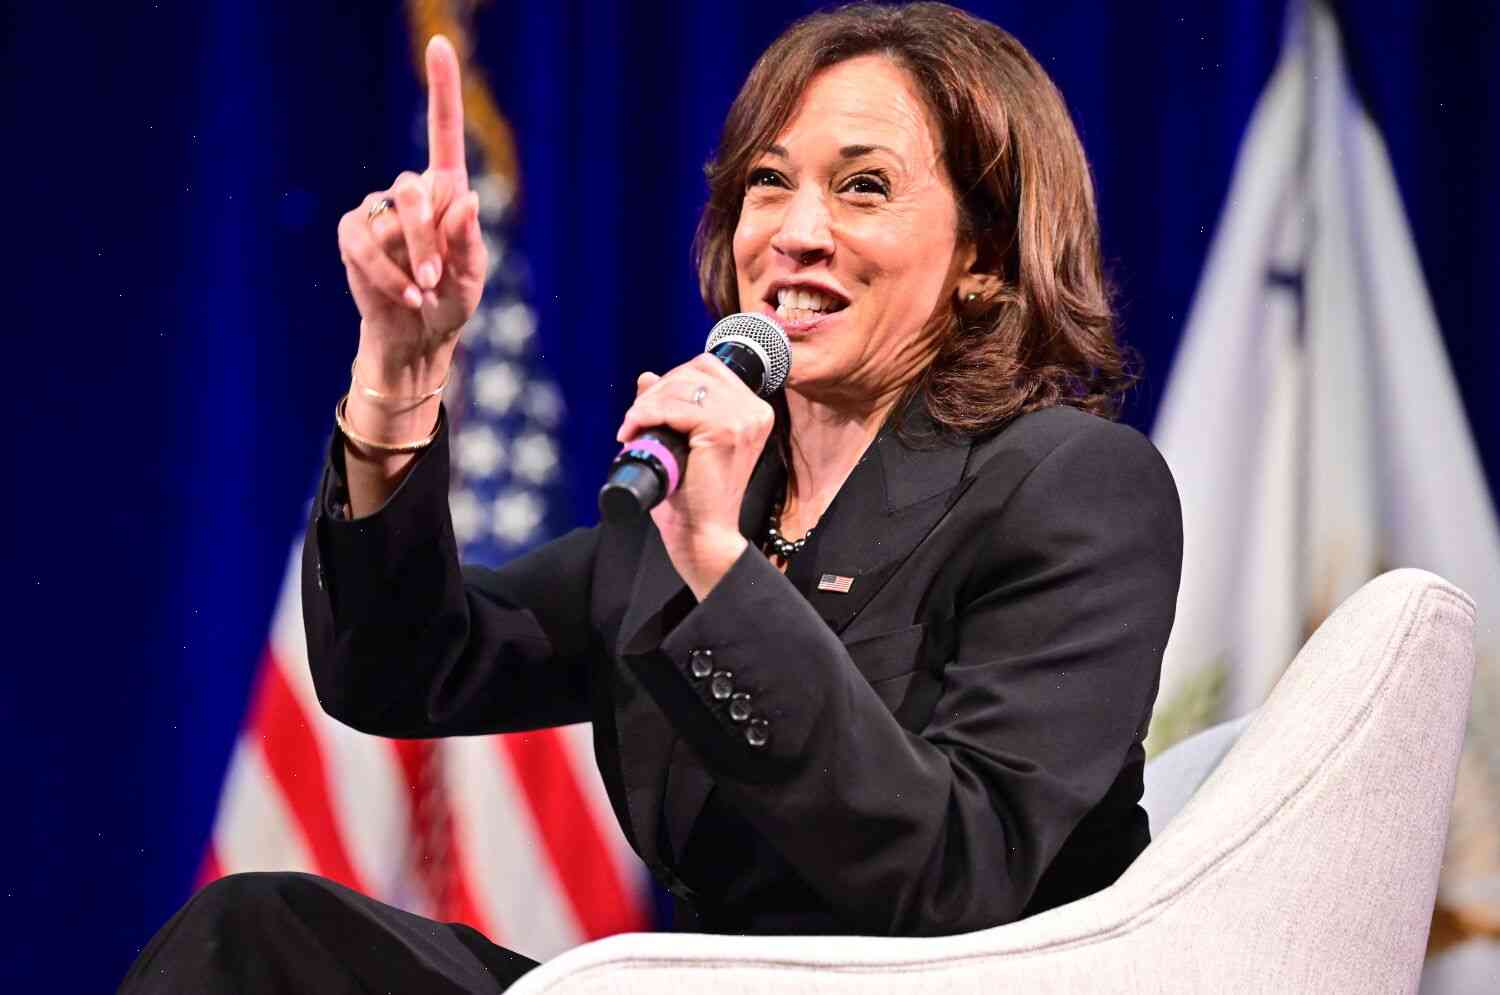 Kamala Harris criticized the Trump administration for its actions undermining the Environmental Protection Agency